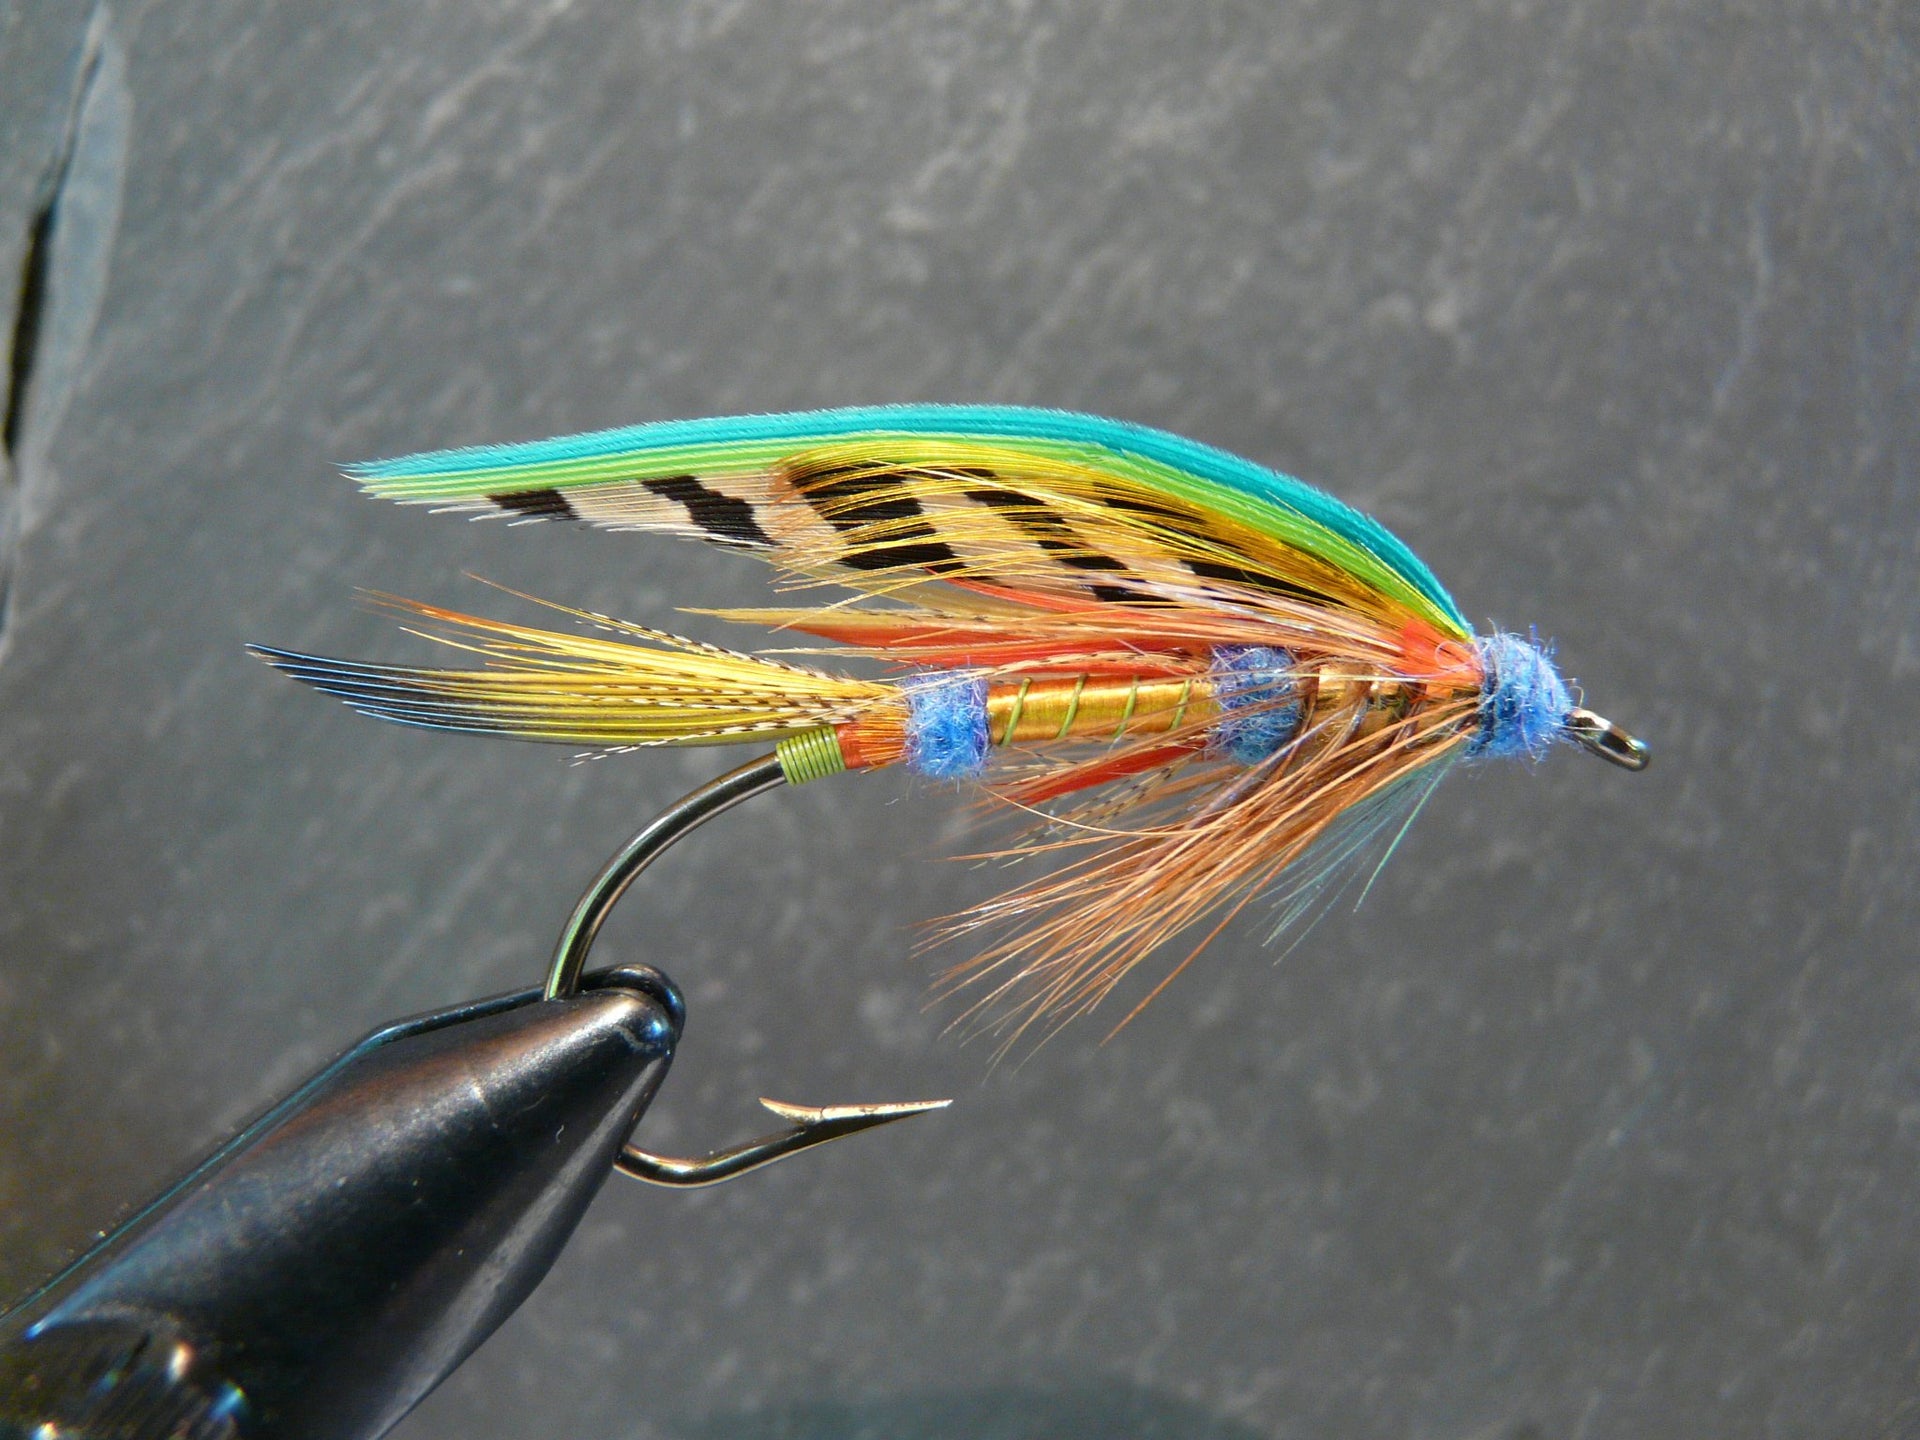 Tying feathers to the hooks of our lures 